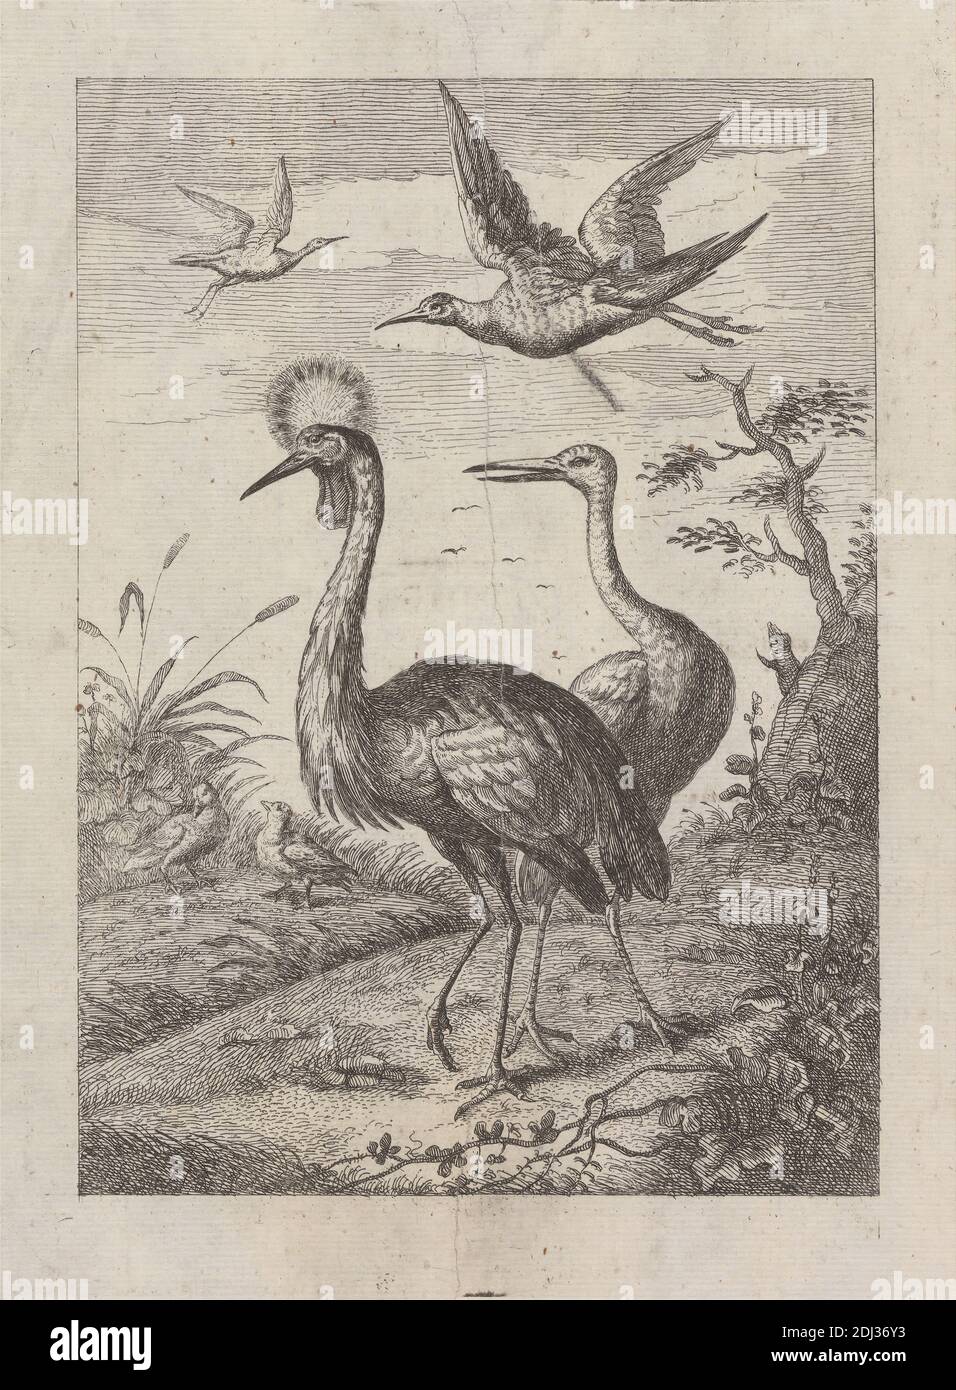 Two Crested cranes and four other birds, a Pl. for 'A New Drawing Book...of Various Kinds of Birds, Drawn from Life by Mr. Francis Barlow' 1731 (1 of 9), Print made by George Bickham, 1683/4–1758, British, after Francis Barlow, ca. 1626–1704, British, Published by Henry Overton, 1675/6–1751, British, 1731, Etching on medium, smooth, cream laid paper, Sheet: 11 5/16 x 7 5/16 inches (28.7 x 18.6 cm), Plate: 8 5/16 x 6 1/4 inches (21.1 x 15.9 cm), and Image: 7 1/8 x 5 1/8 inches (18.1 x 13 cm), animal art, birds, branches, clouds, cranes (birds), crested cranes (birds), ducks, flying, hills Stock Photo